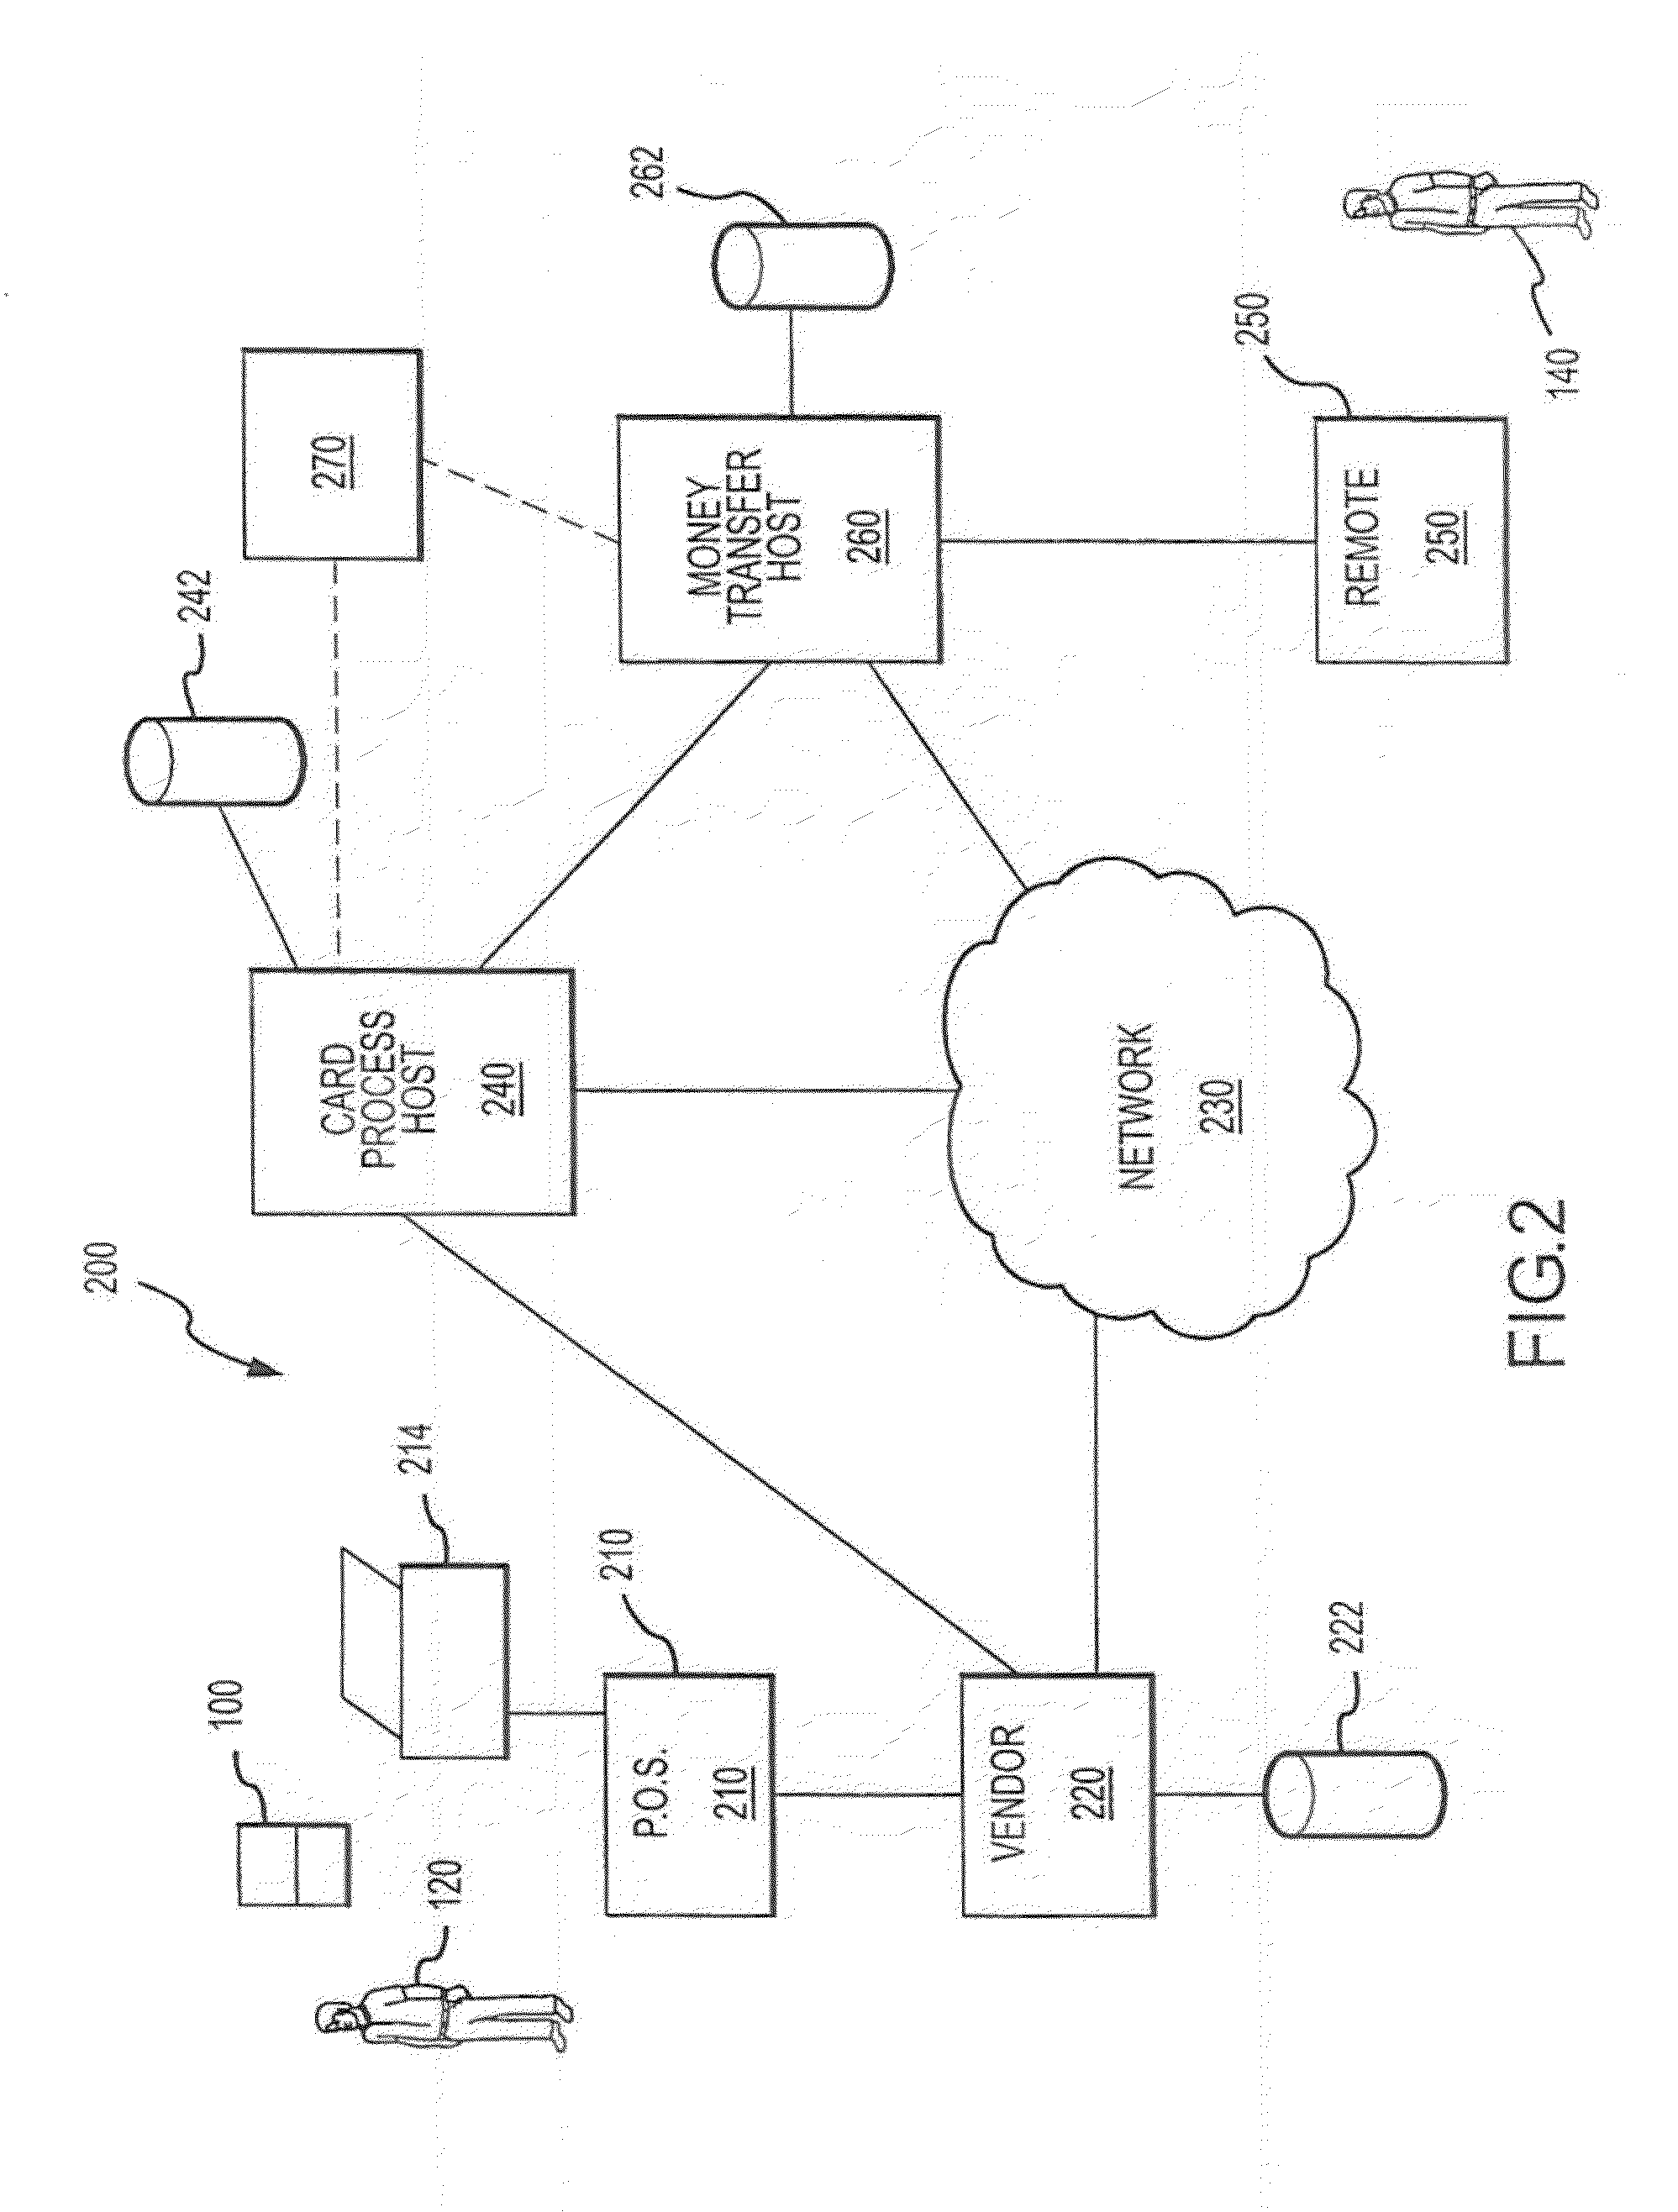 Money transfer systems and methods